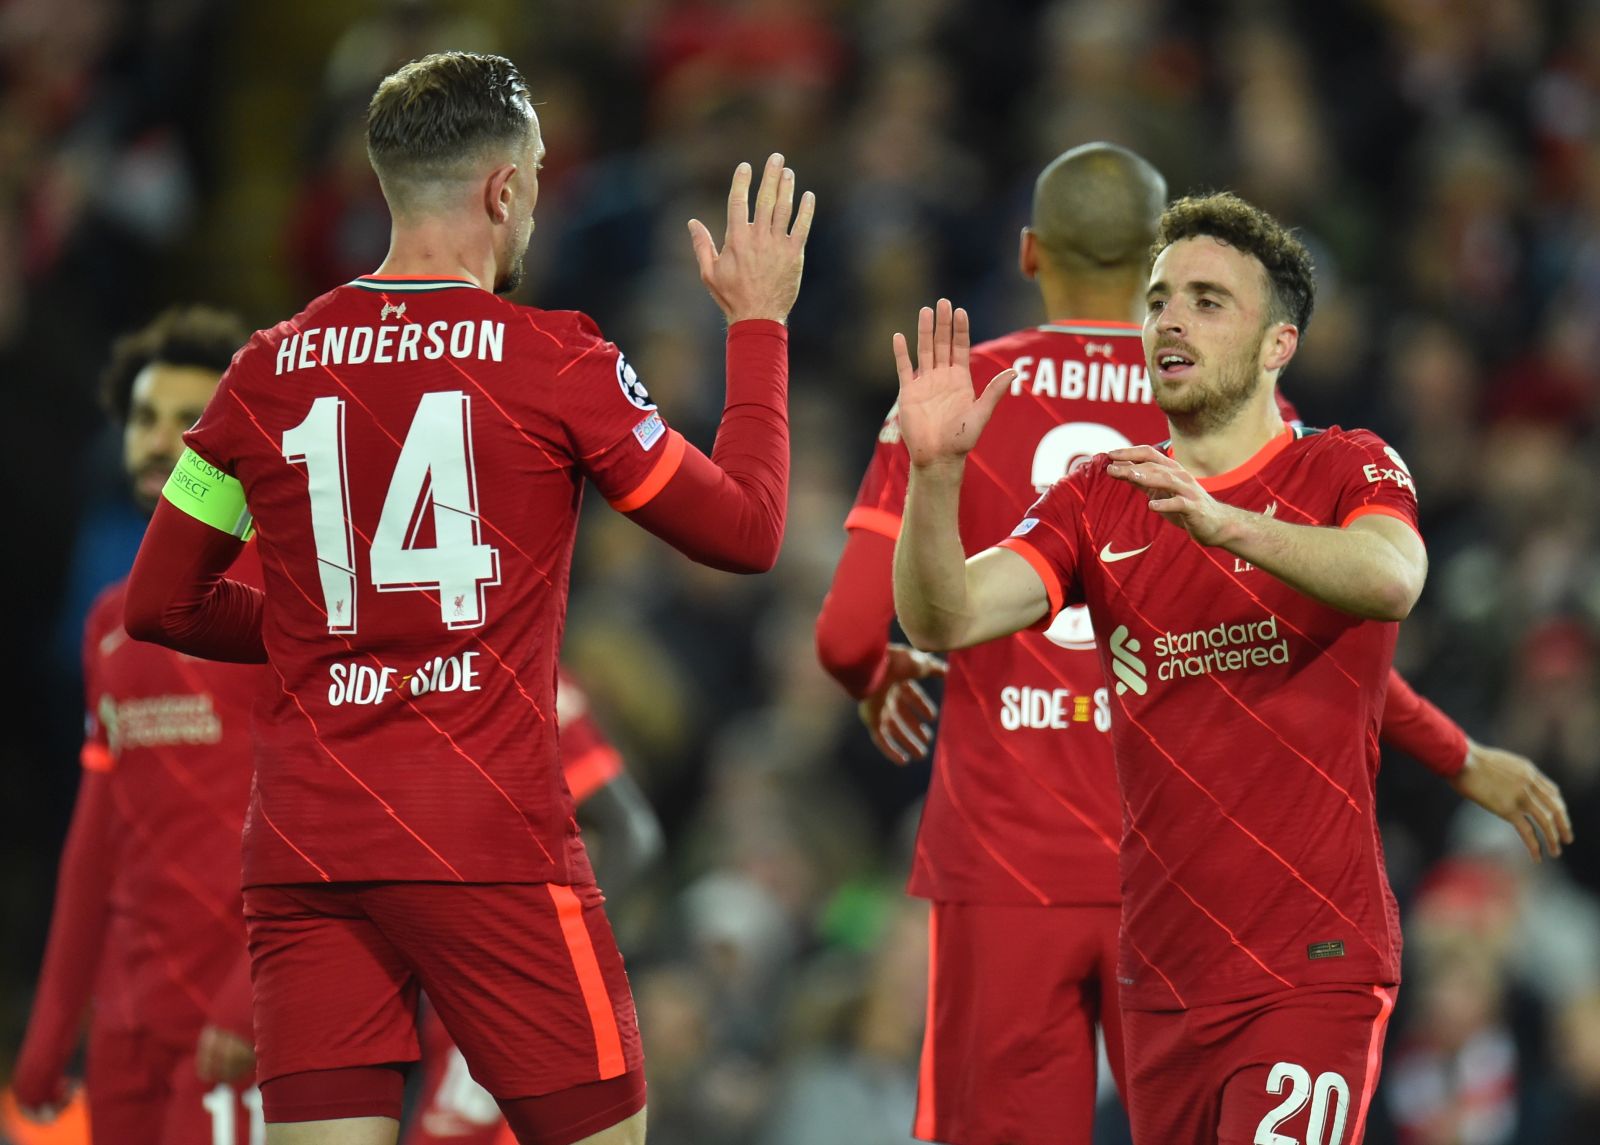 epa09562092 Liverpool's Diogo Jota (R) celebrates with teammate Jordan Henderson (L) after scoring the 1-0 lead during the UEFA Champions League group B soccer match between Liverpool FC and Atletico Madrid in Liverpool, Britain, 03 November 2021.  EPA/Peter Powell